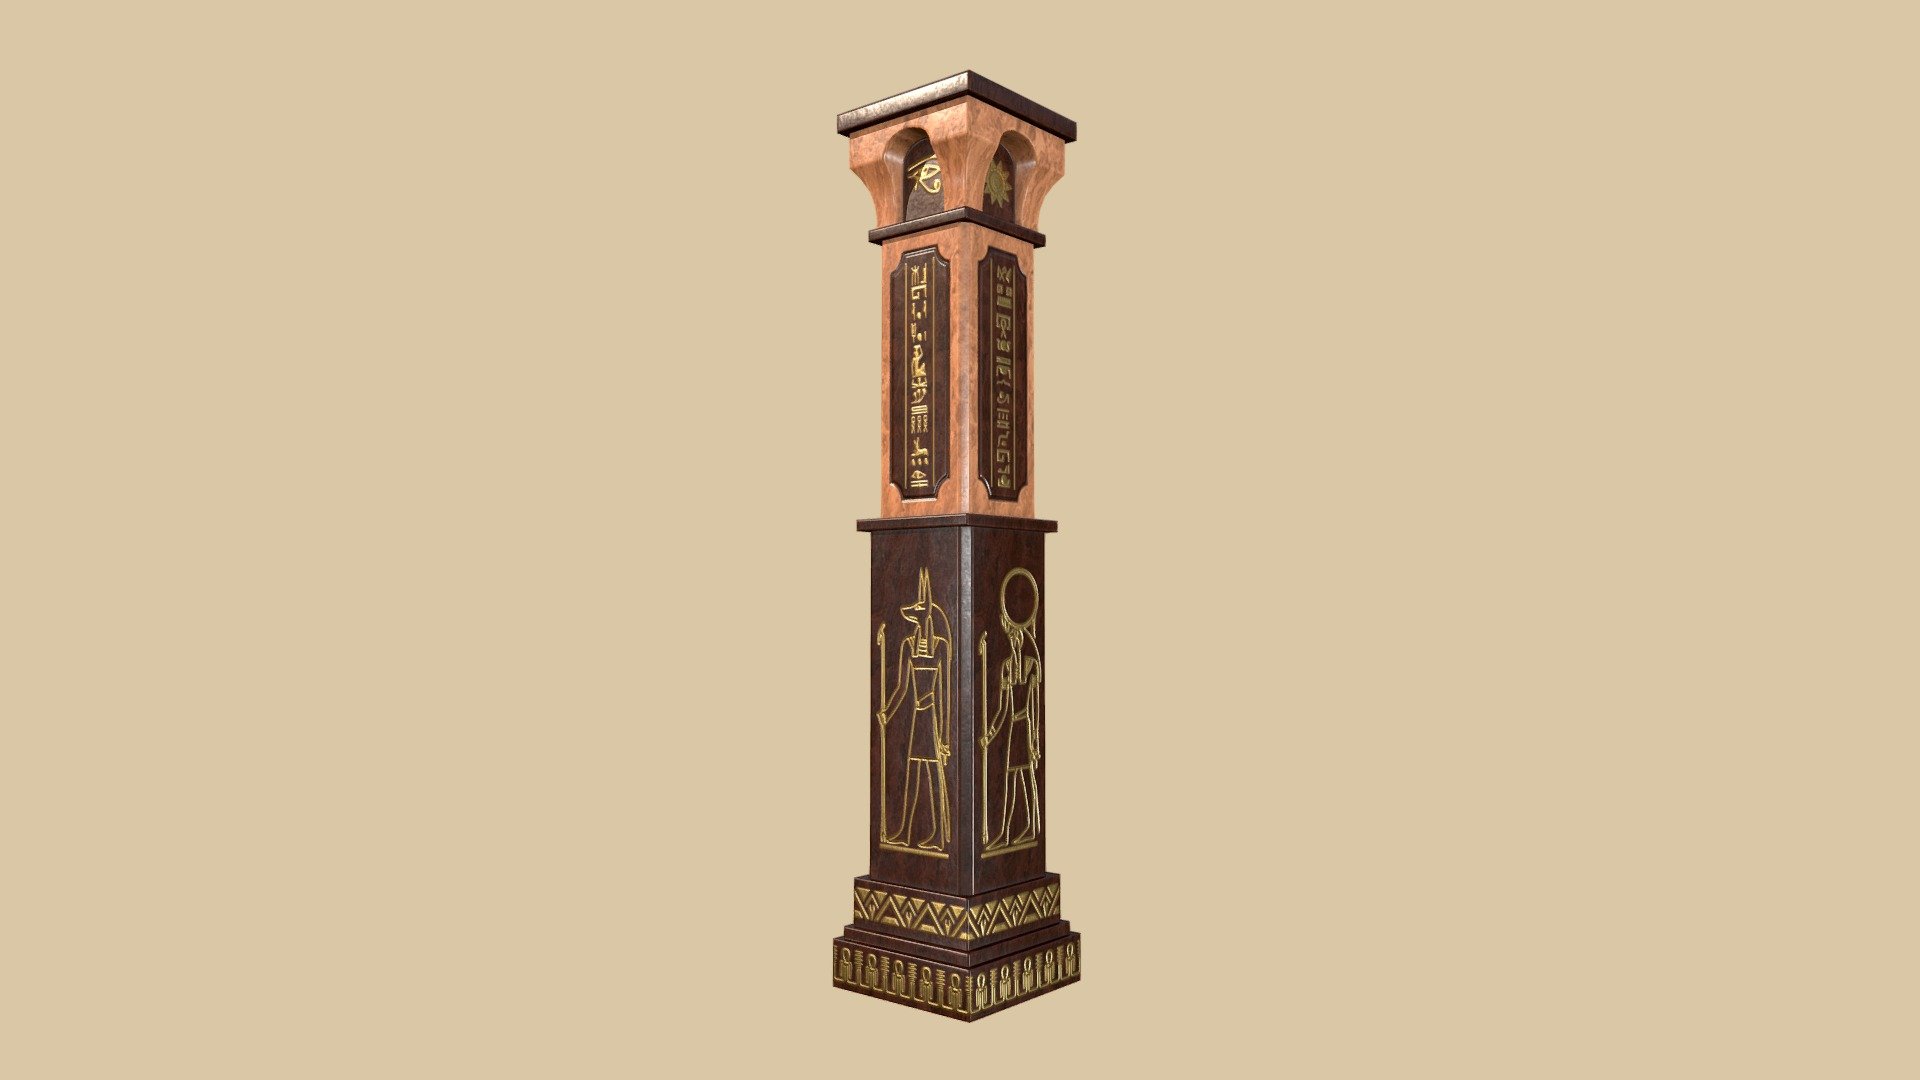 Low Poly Egyptian Column Fantasy Style is perfect for your project in Fantasy style or other projects.

This model was created in 3ds Max 2022 and textured in Substance Painter

This model was tested in Unity 2021.3.23f1 and Unreal Engine 5.

The archive includes files with the extensions: .fbx and fbx(for Unity)

Model includes:

-height: 500cm

-width: 100cm

-Polys: 294

-Tris: 588

-Verts: 352

-1 material

-1 mesh

-UV mapping: 1

-Textures resolution: 2k and 4k, PNG format

-Textures for Unity: Albedo, Metallic, Normal, Roughness, Ambient Occlusion.

-Textures for Unreal Engine: BaseColor, Normal, ORM.

You can download an Additional file zip with 2 sets(for Unity and Unreal Engine) 3d model